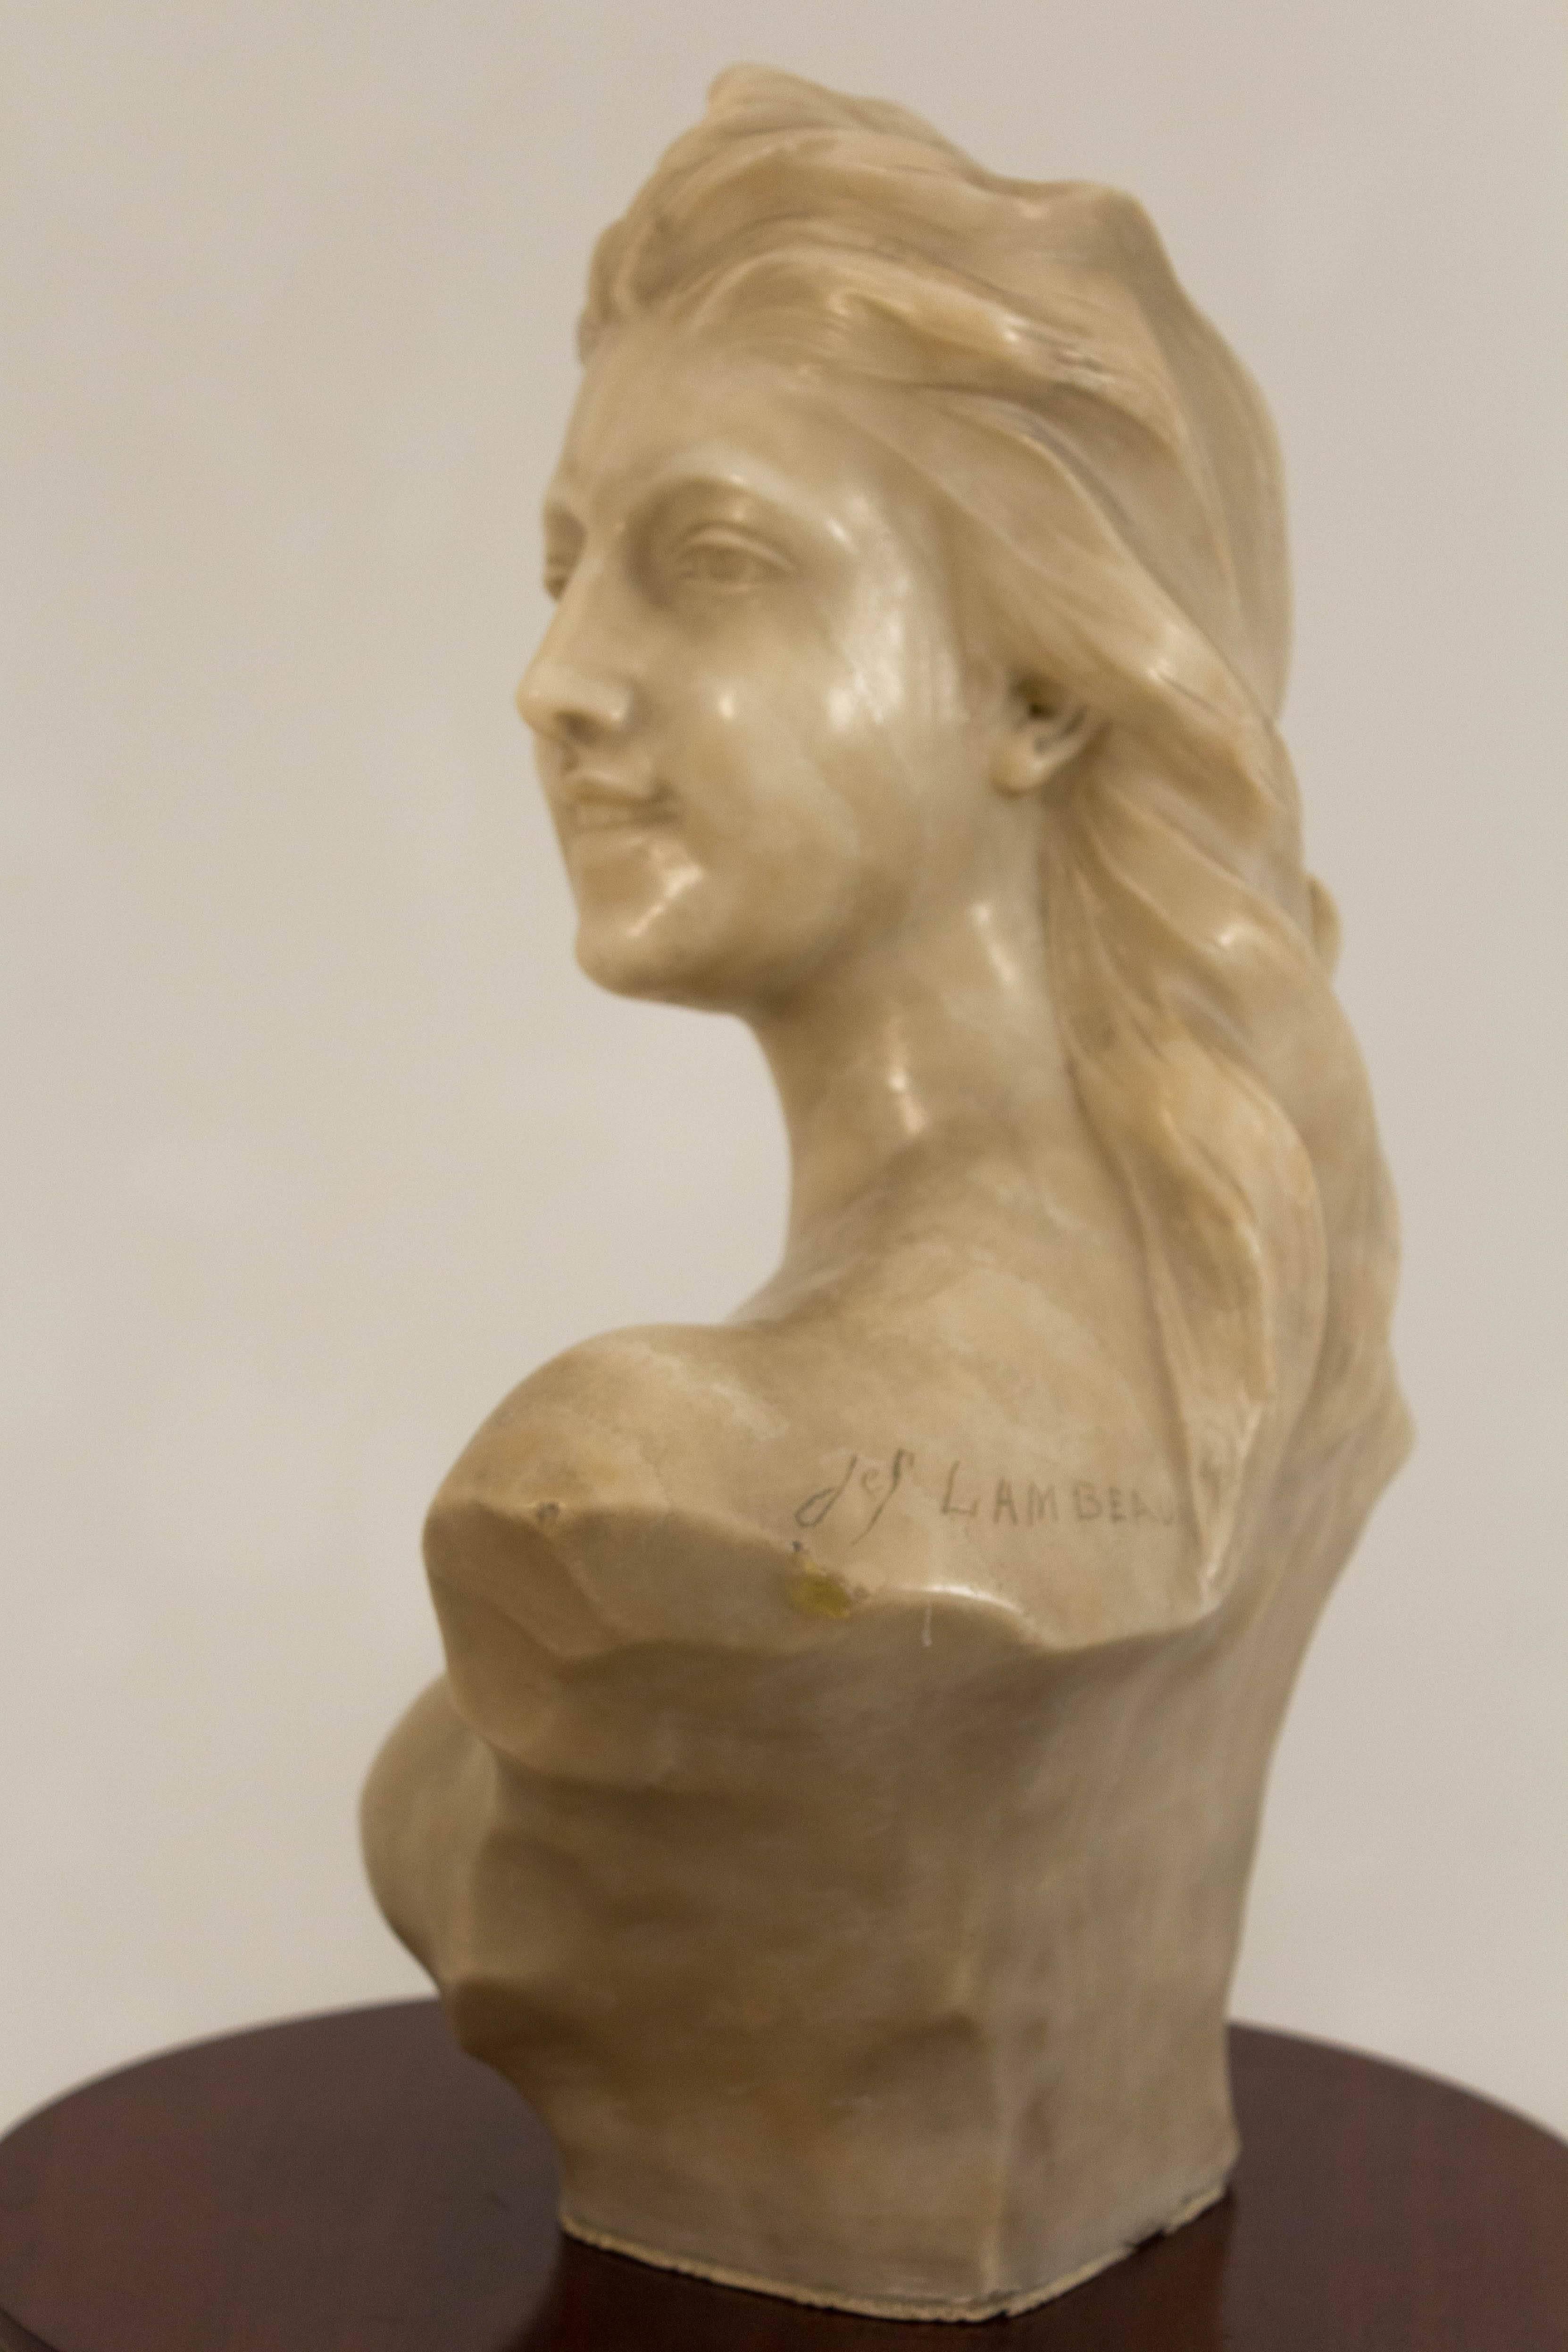 Alabaster Stunning Art Nouveau Bust of Young Lady by Jef Lambeaux